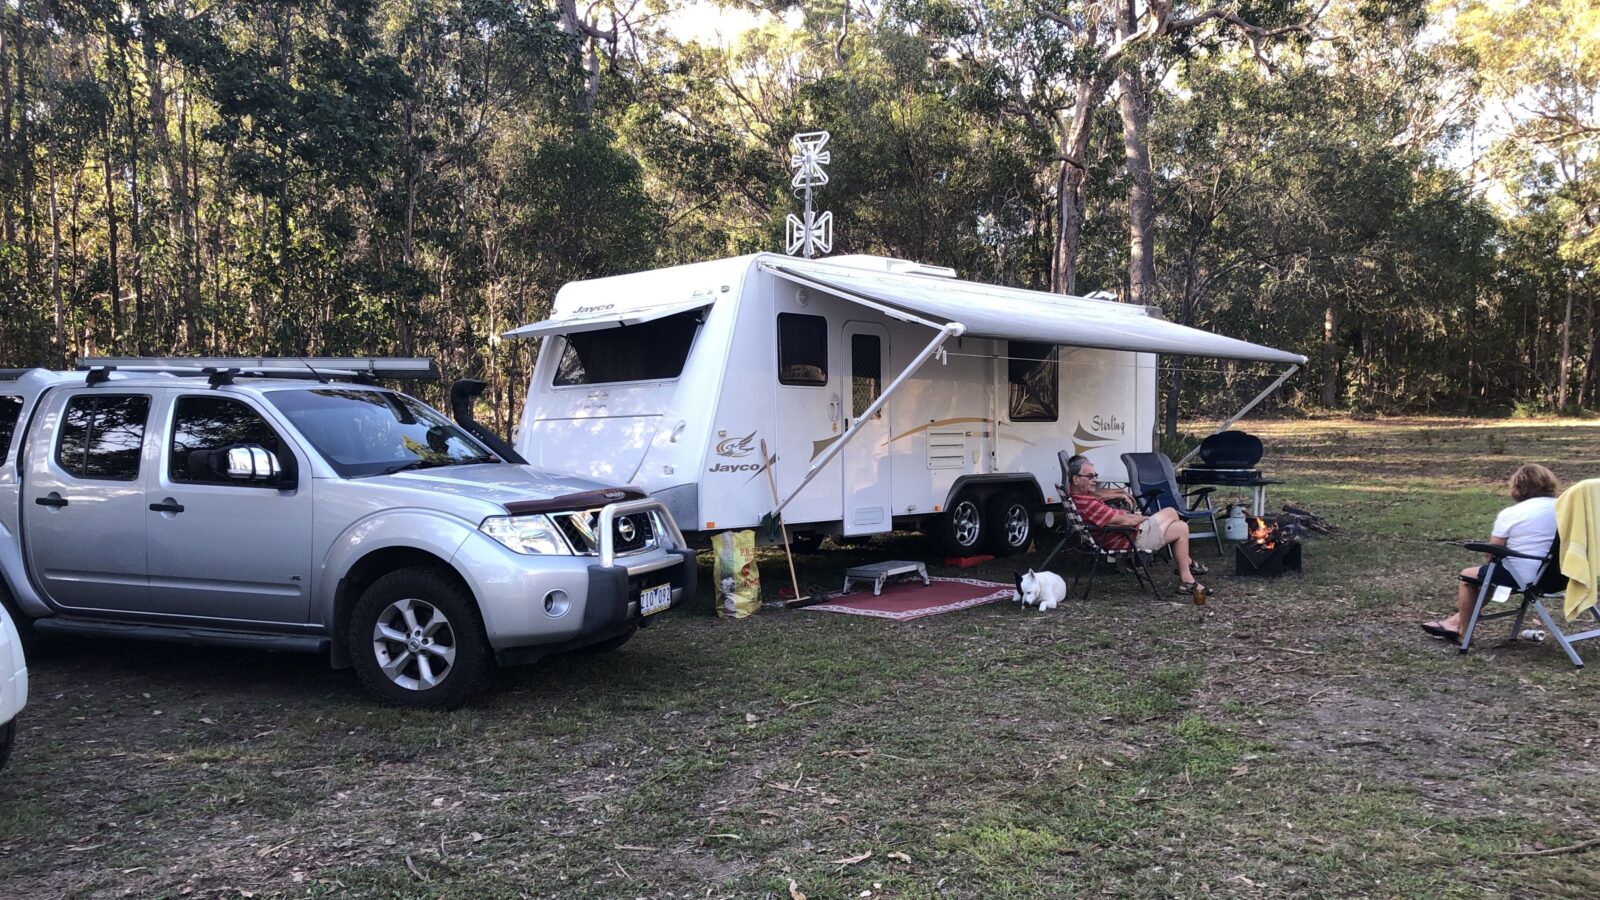 This is a photo of us camped on this beautiful property at Agnes Water, we are having a wonderful time relaxing. Campfire lit, chilling while listening to the beautiful birds. Only a minute down the road is an exquisite coast.